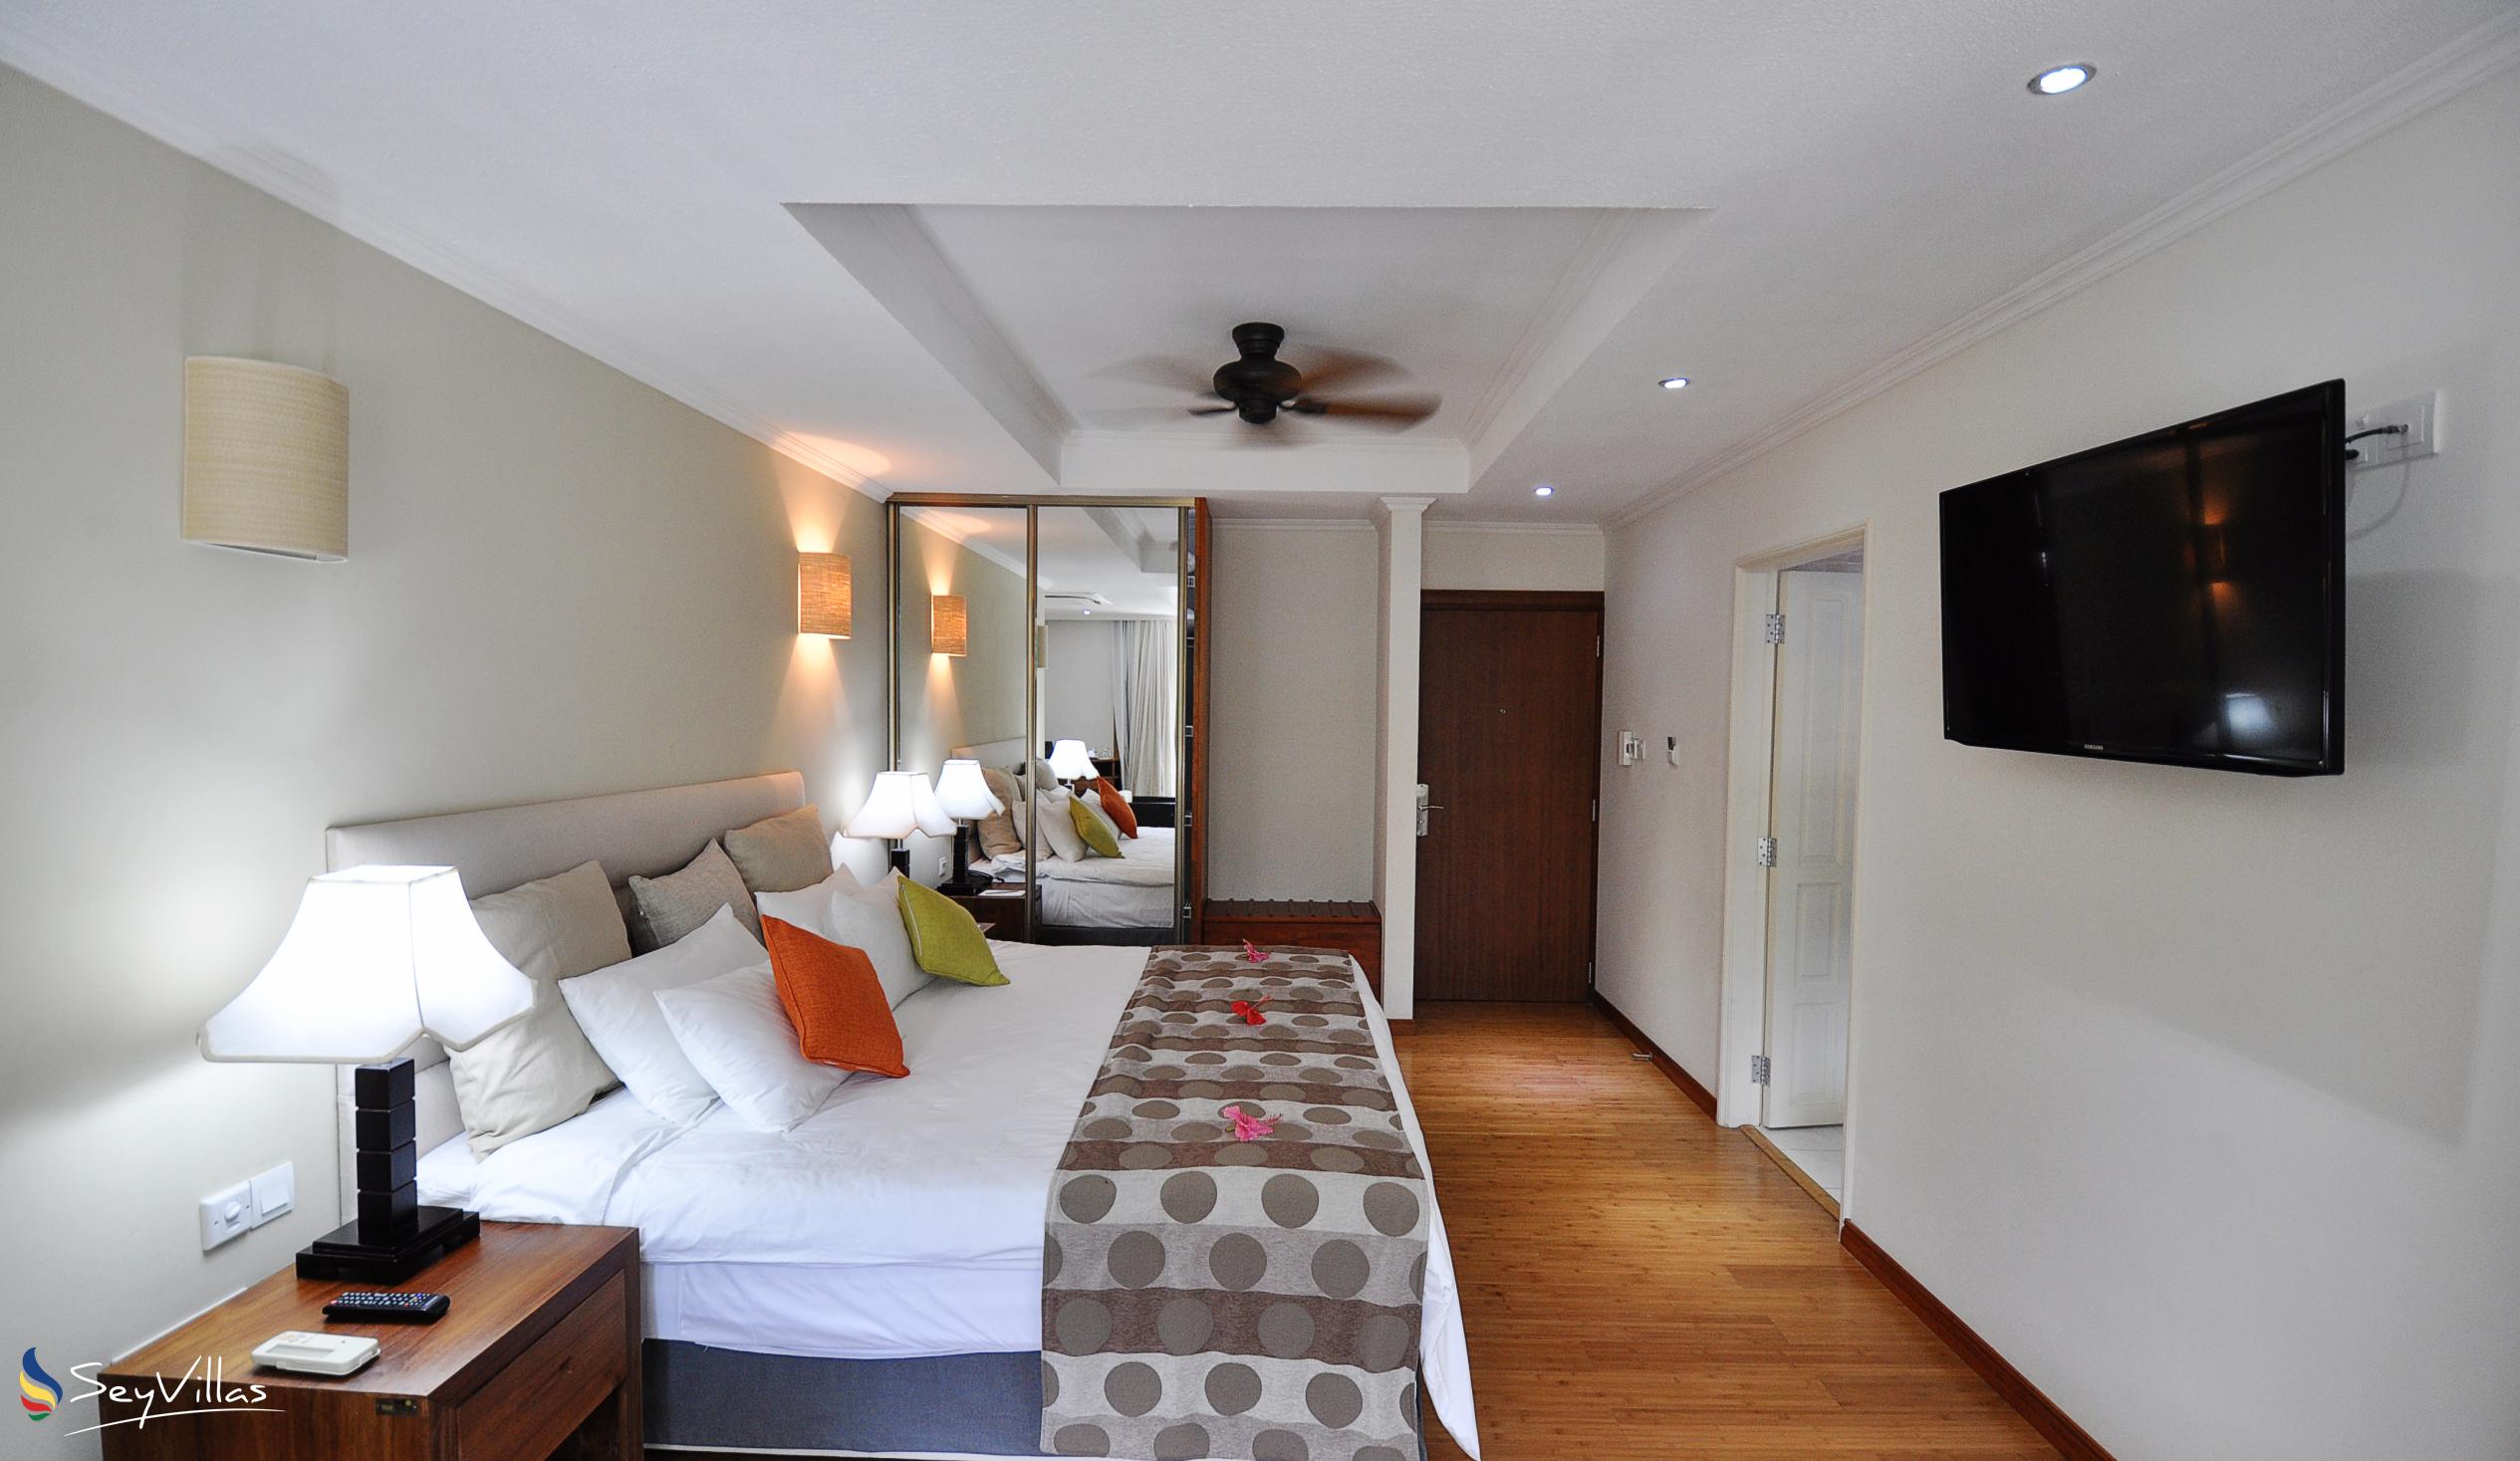 Photo 22: Crown Beach Hotel - Deluxe Room Mountain View - Mahé (Seychelles)